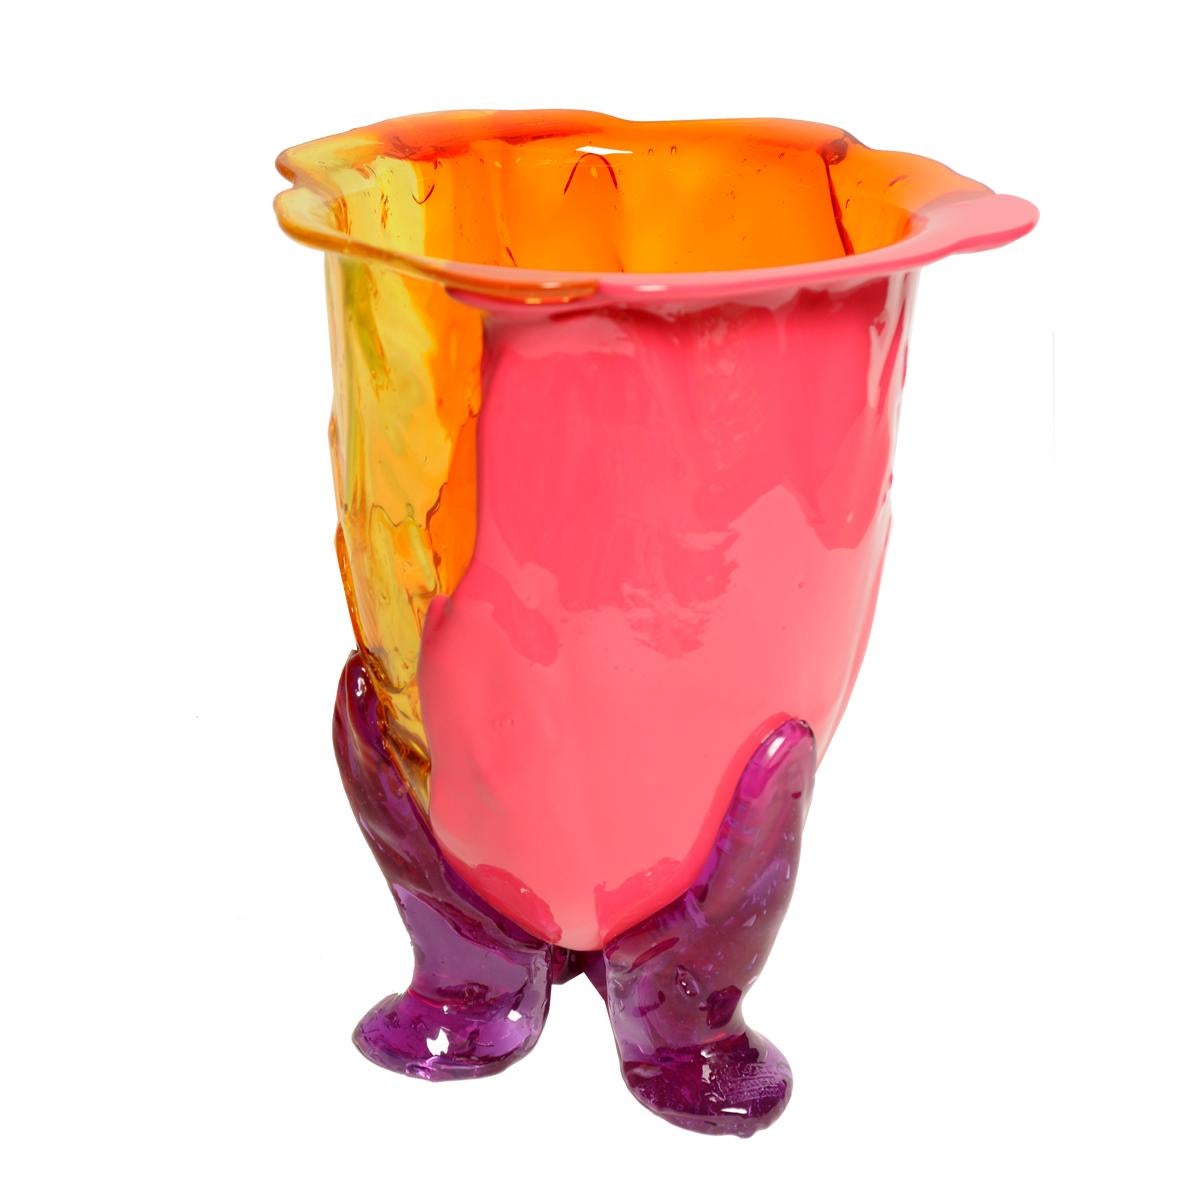 Amazonia vase - clear yellow, clear orange, matt fuchsia, clear lilac.

Vase in soft resin designed by Gaetano Pesce in 1995 for Fish Design collection.

Measures: L Ø 22cm x H 36cm
Other sizes available.
Colours: clear yellow, clear orange,